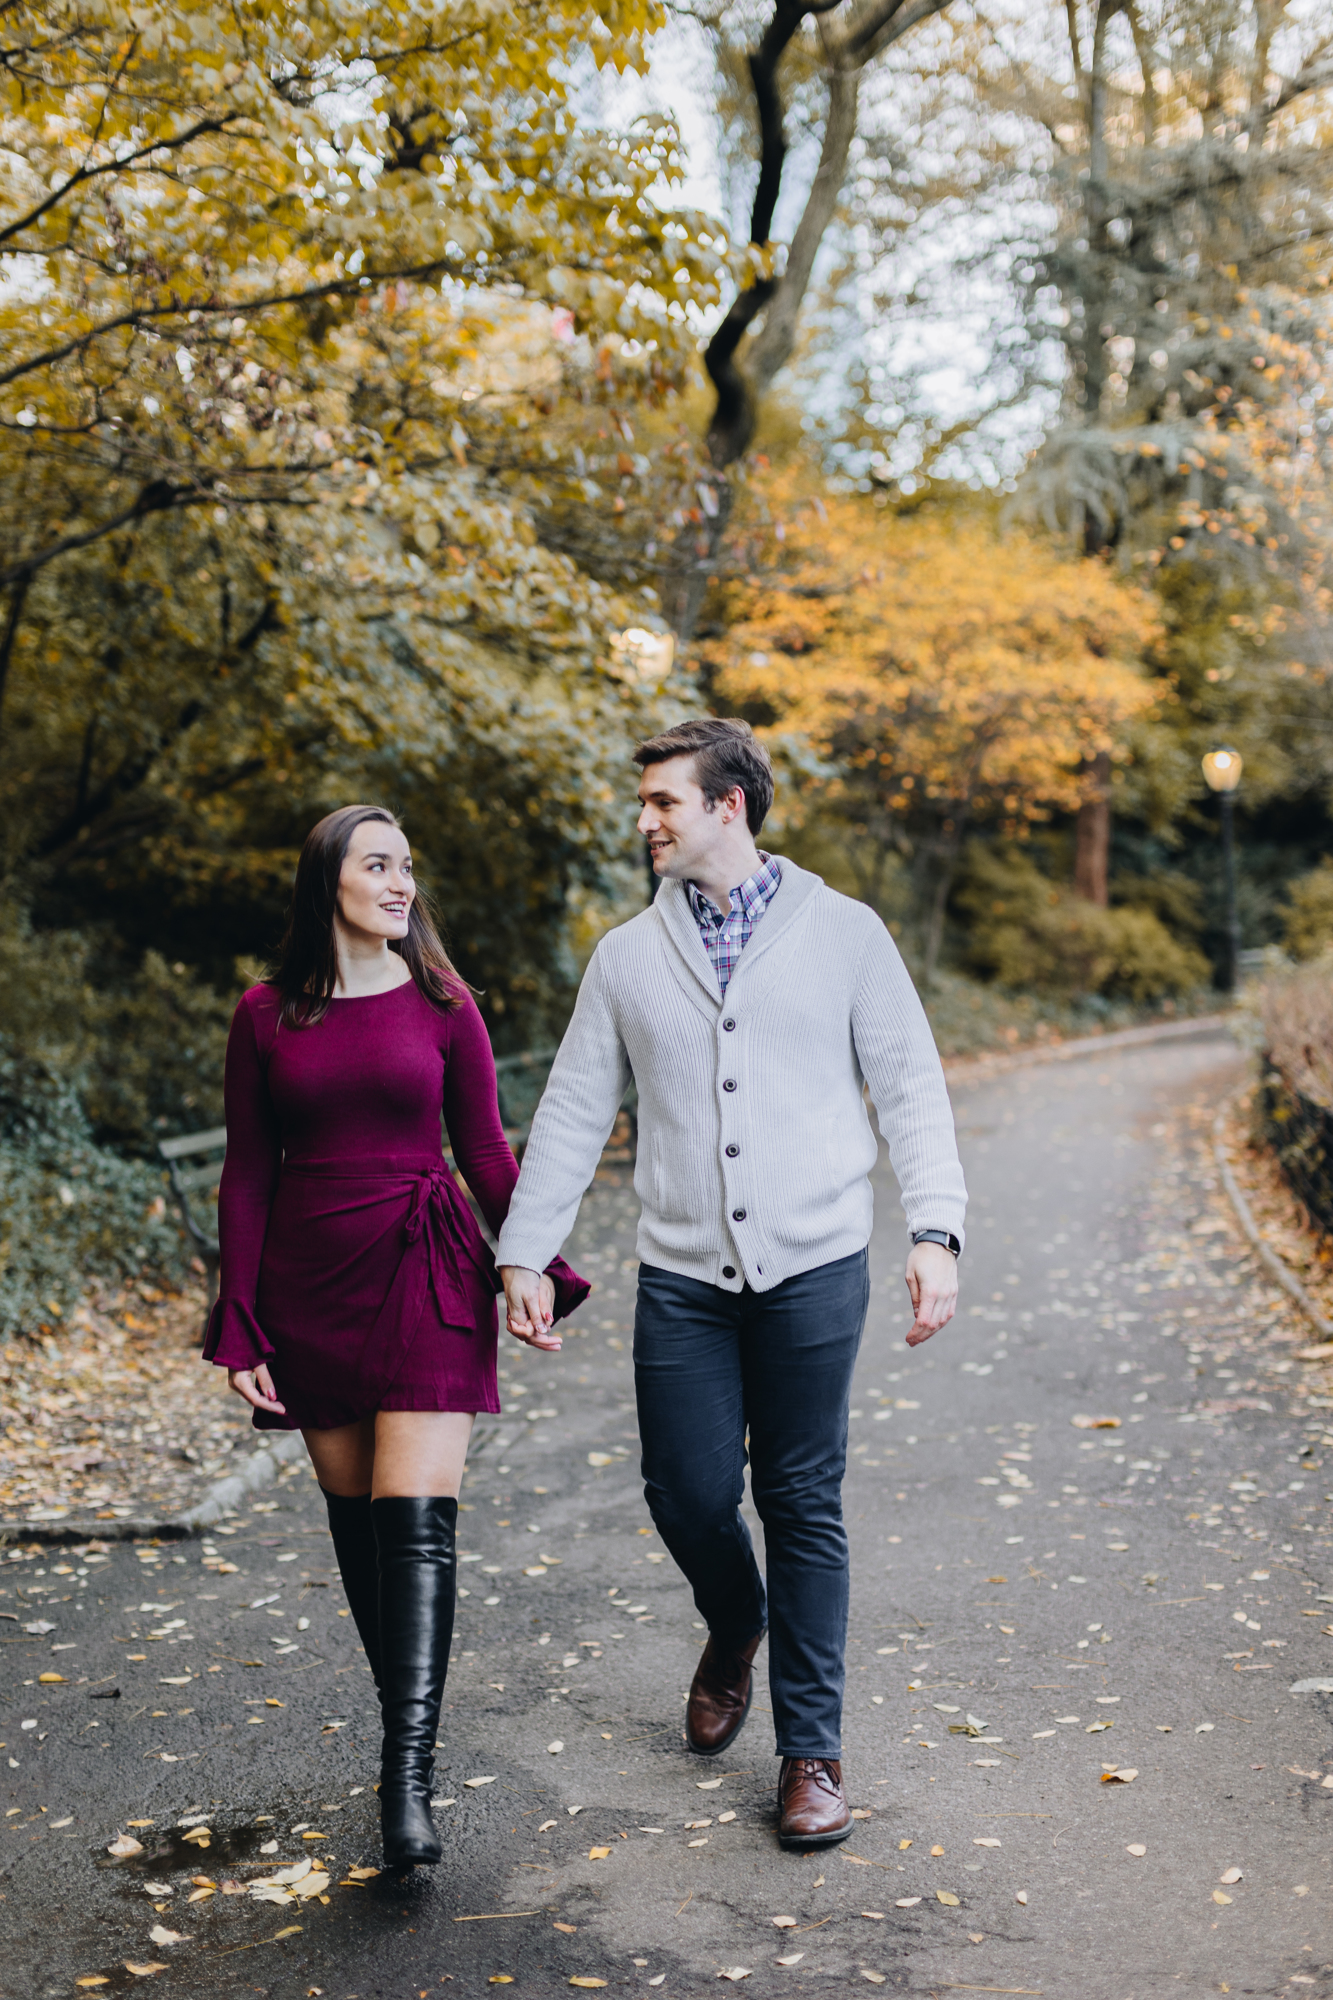 Stylish Fall Engagement Photos in Central Park New York